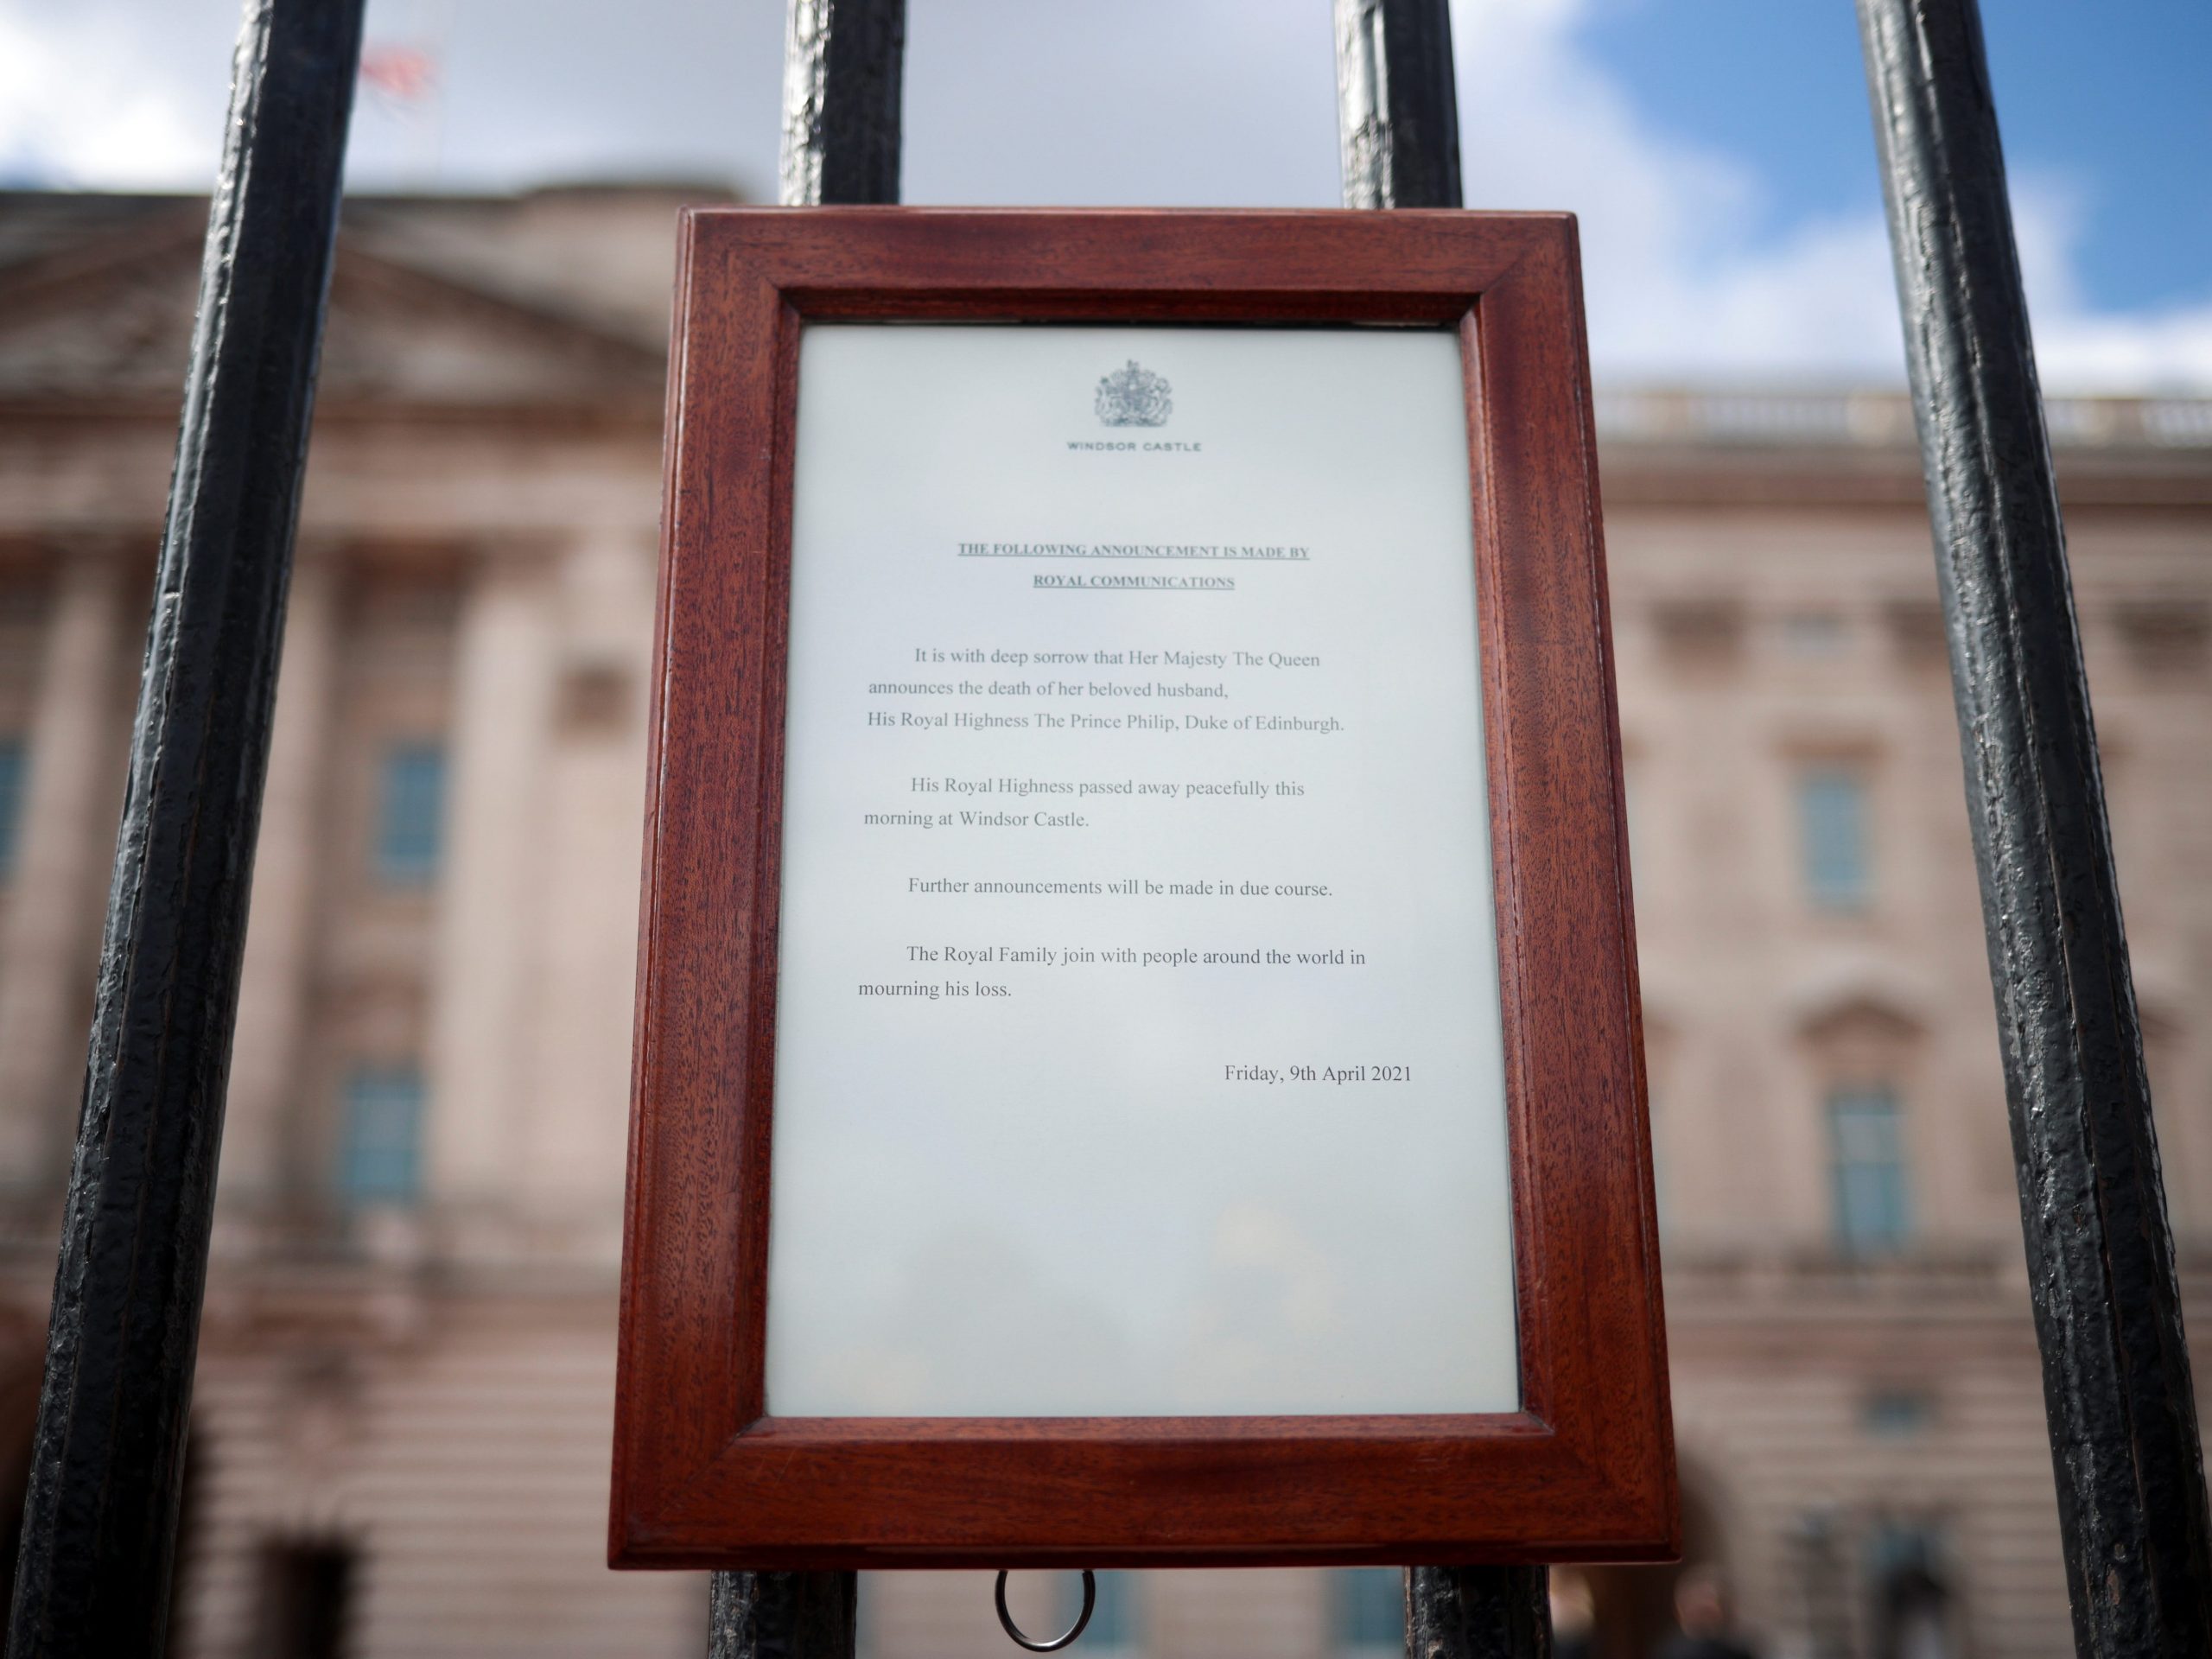 Photos show Buckingham Palace hanging a sign announcing Prince Philip's